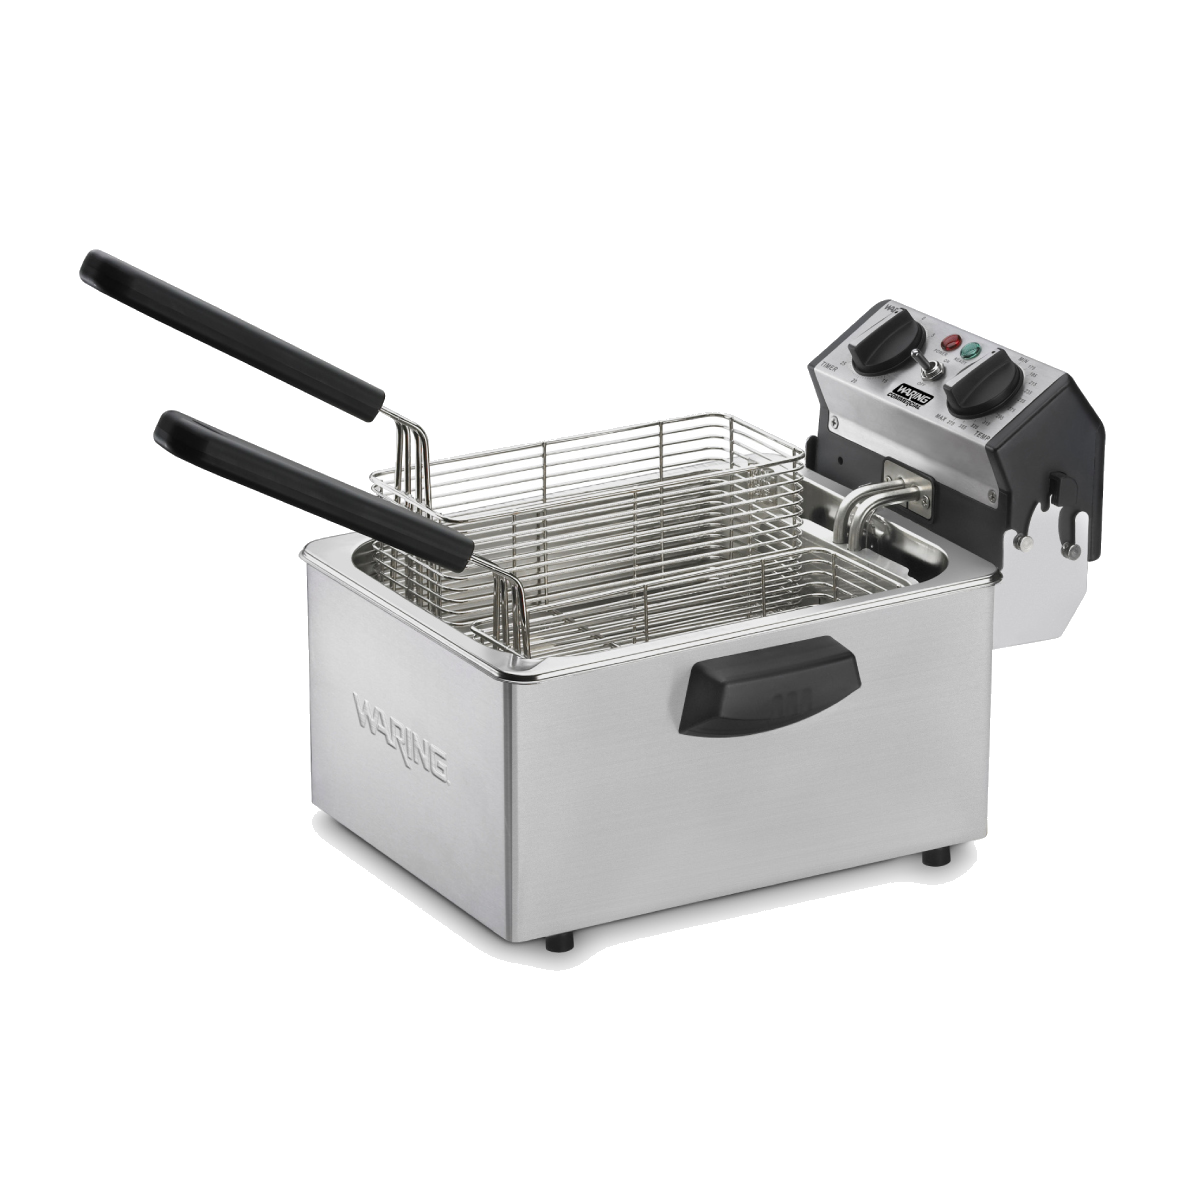 https://www.waringcommercialproducts.com/files/products/wdf75rc-75b-waring-deep-fryer-main.png